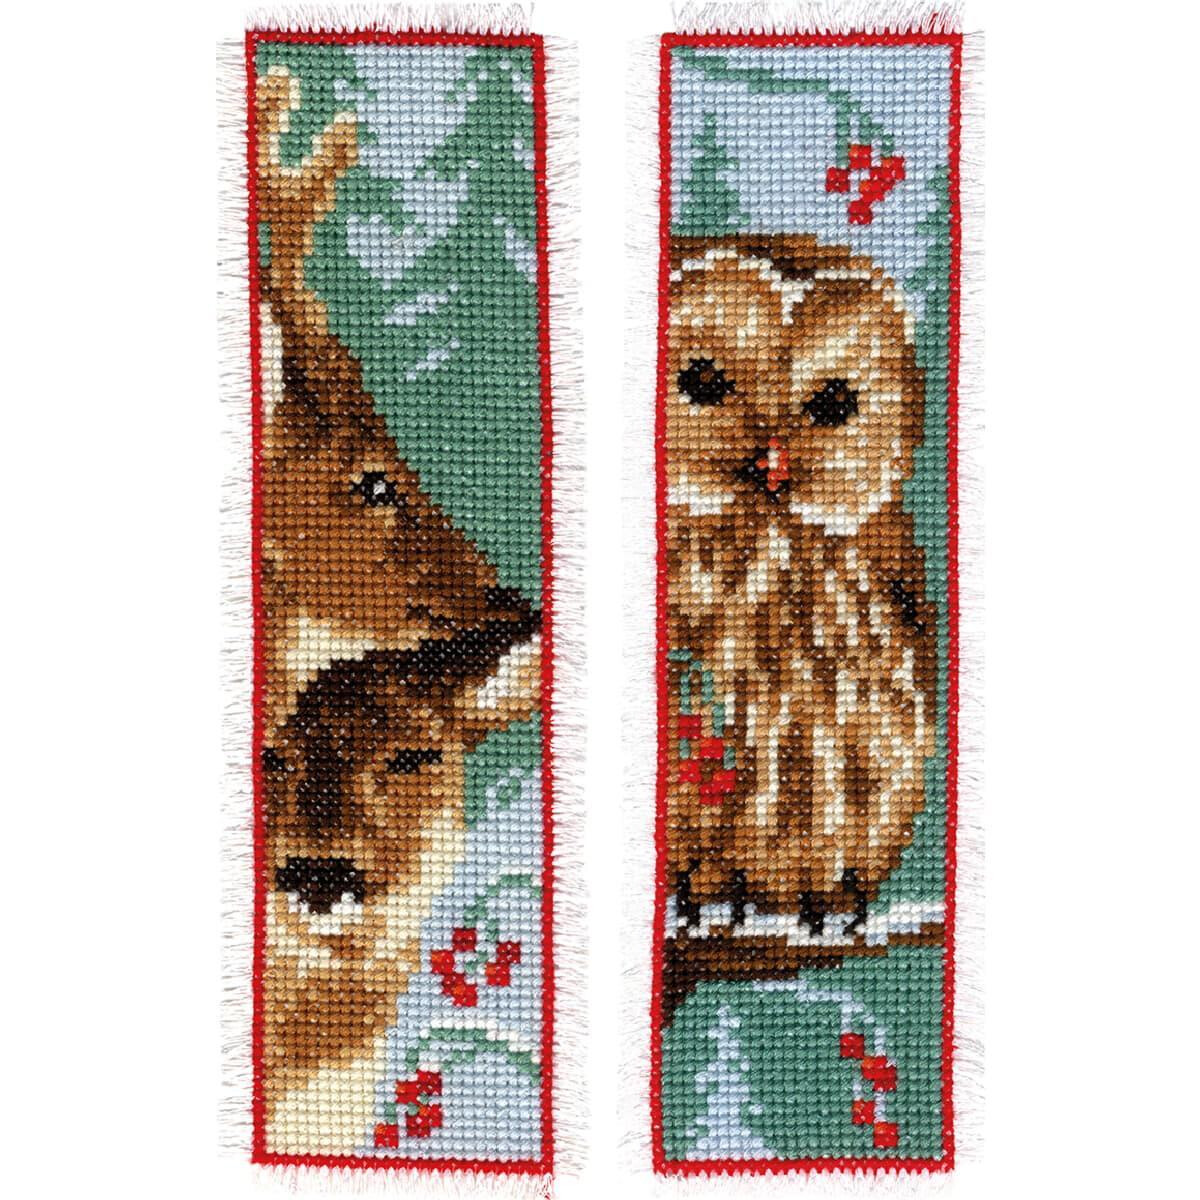 Vervaco bookmark counted cross stitch kit "Owl and...